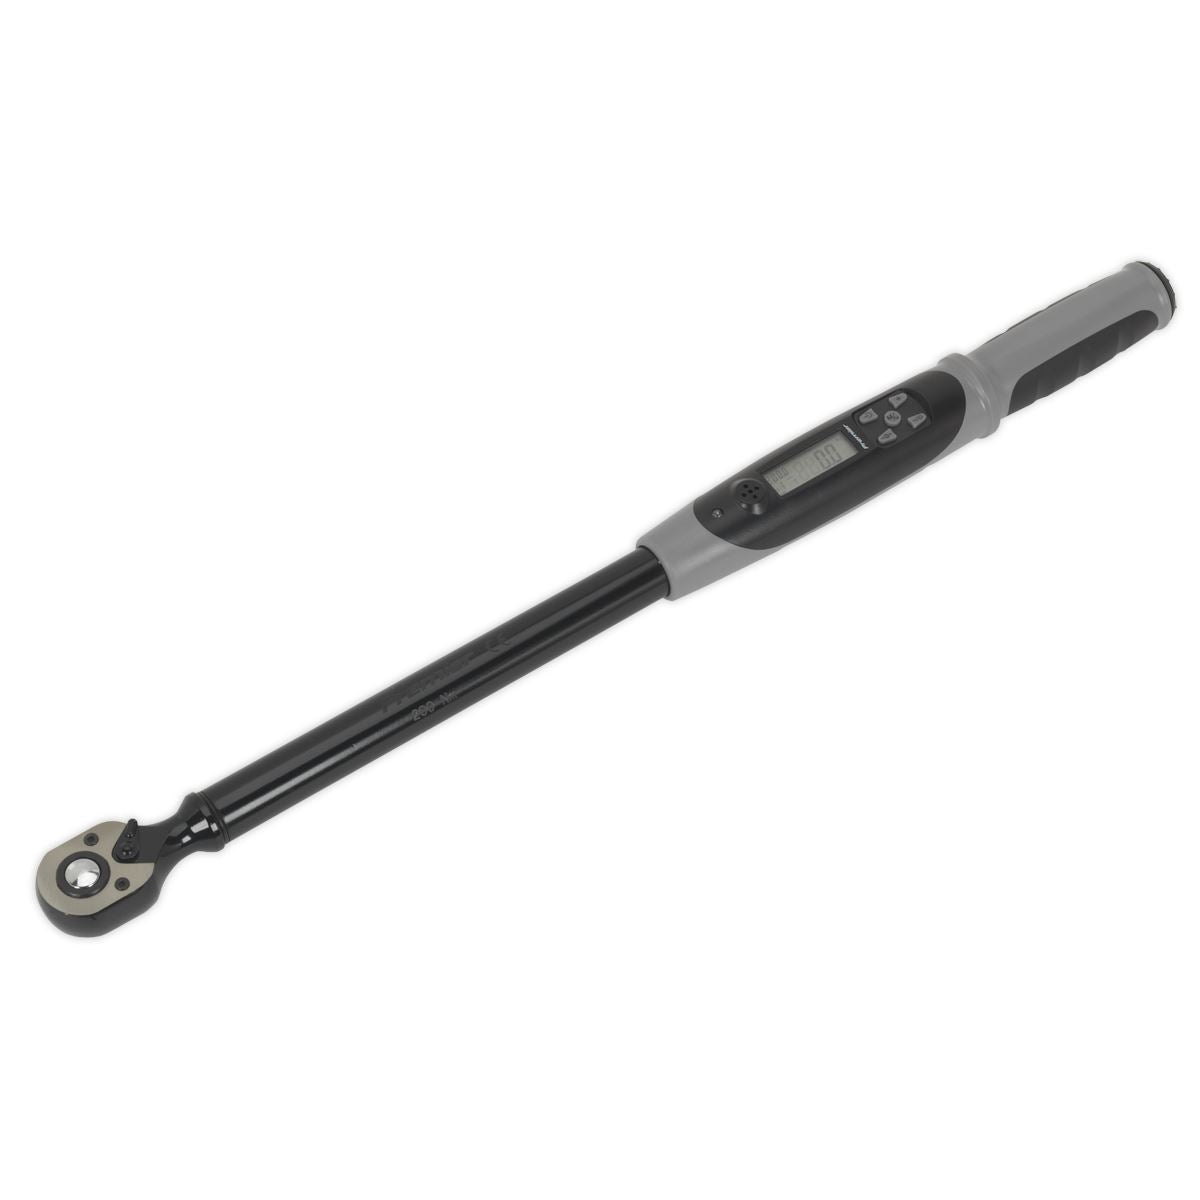 Sealey Angle Torque Wrench Digital 1/2" Drive 20-200Nm (14.7-147.5lb.ft) Black Series